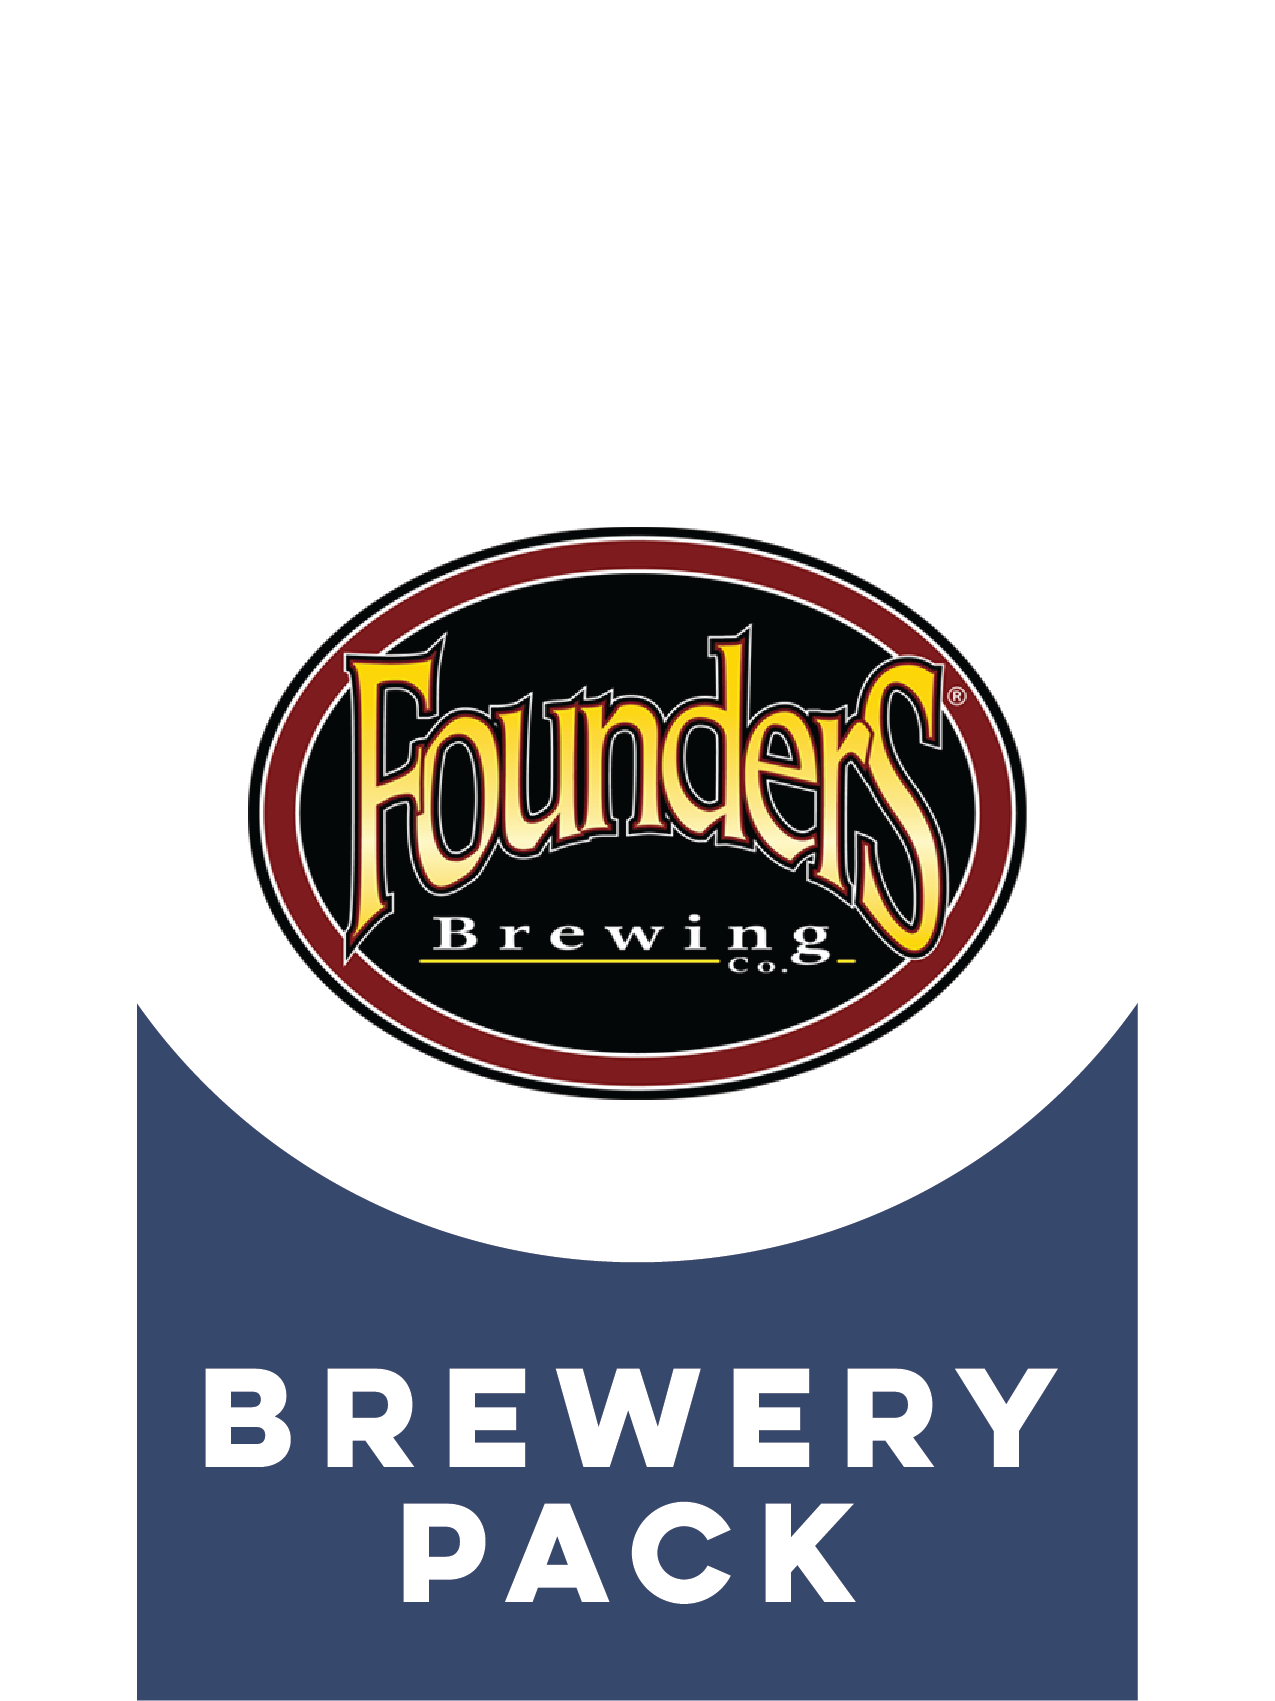 -Founders- Founders Brewery Pack-Packs & Cases- Only @ Beer Republic - The best online beer store for American & Canadian craft beer - Buy beer online from the USA and Canada - Bier online kopen - Amerikaans bier kopen - Craft beer store - Craft beer kopen - Amerikanisch bier kaufen - Bier online kaufen - Acheter biere online - IPA - Stout - Porter - New England IPA - Hazy IPA - Imperial Stout - Barrel Aged - Barrel Aged Imperial Stout - Brown - Dark beer - Blond - Blonde - Pilsner - Lager - Wheat - Weizen 